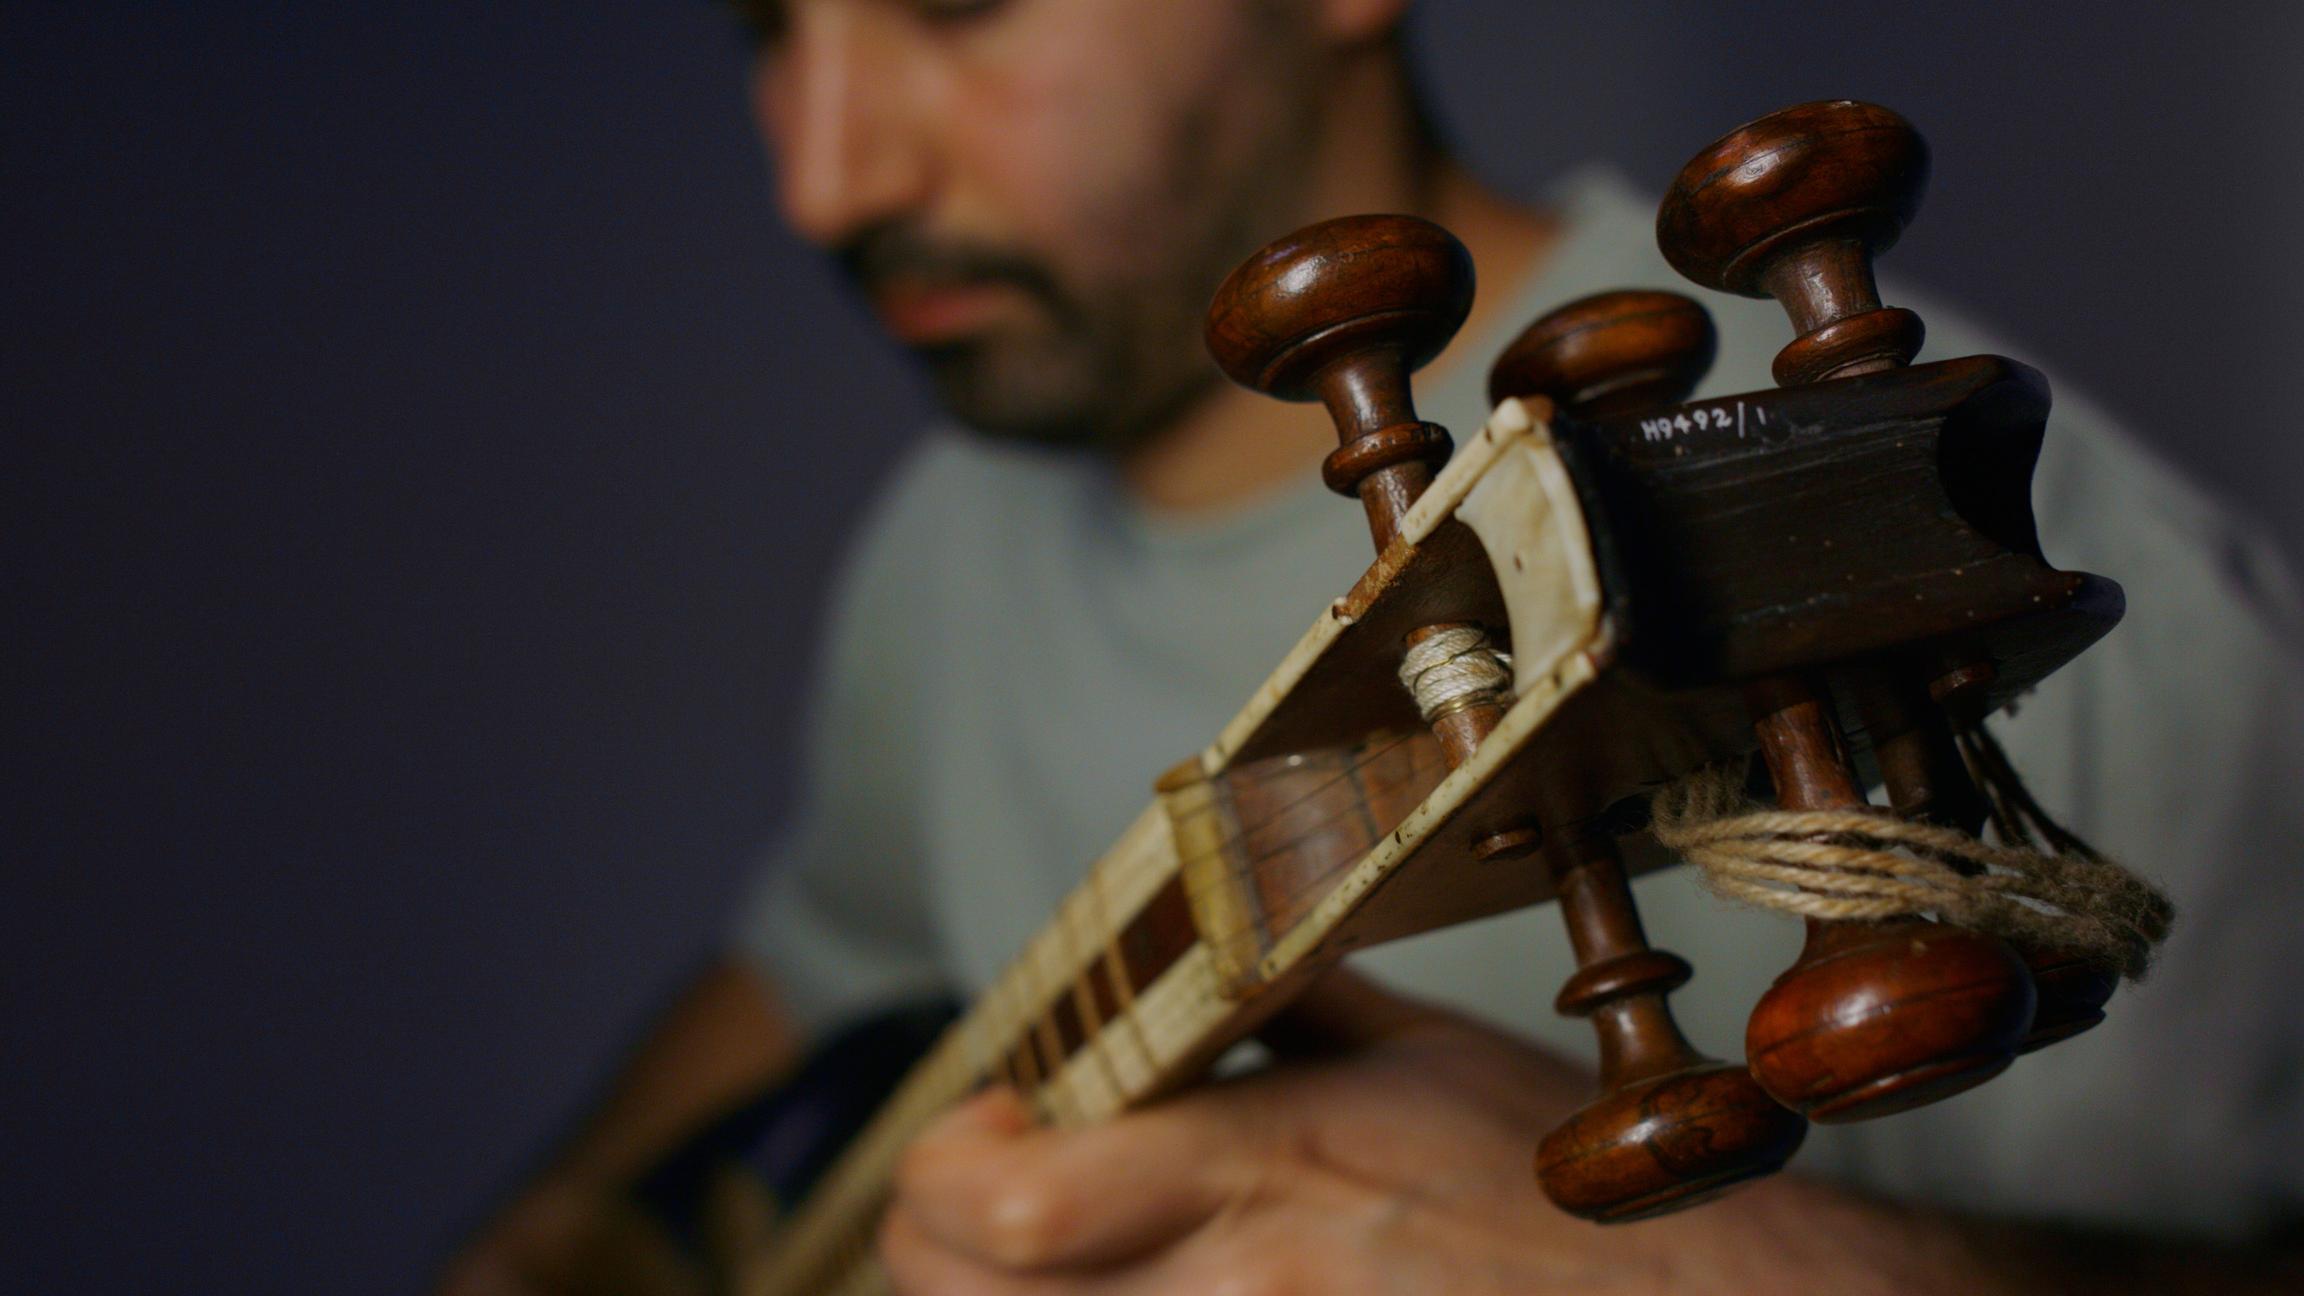 A close up of the top of the neck of the tar which is being played by Hamed Sadeghi.